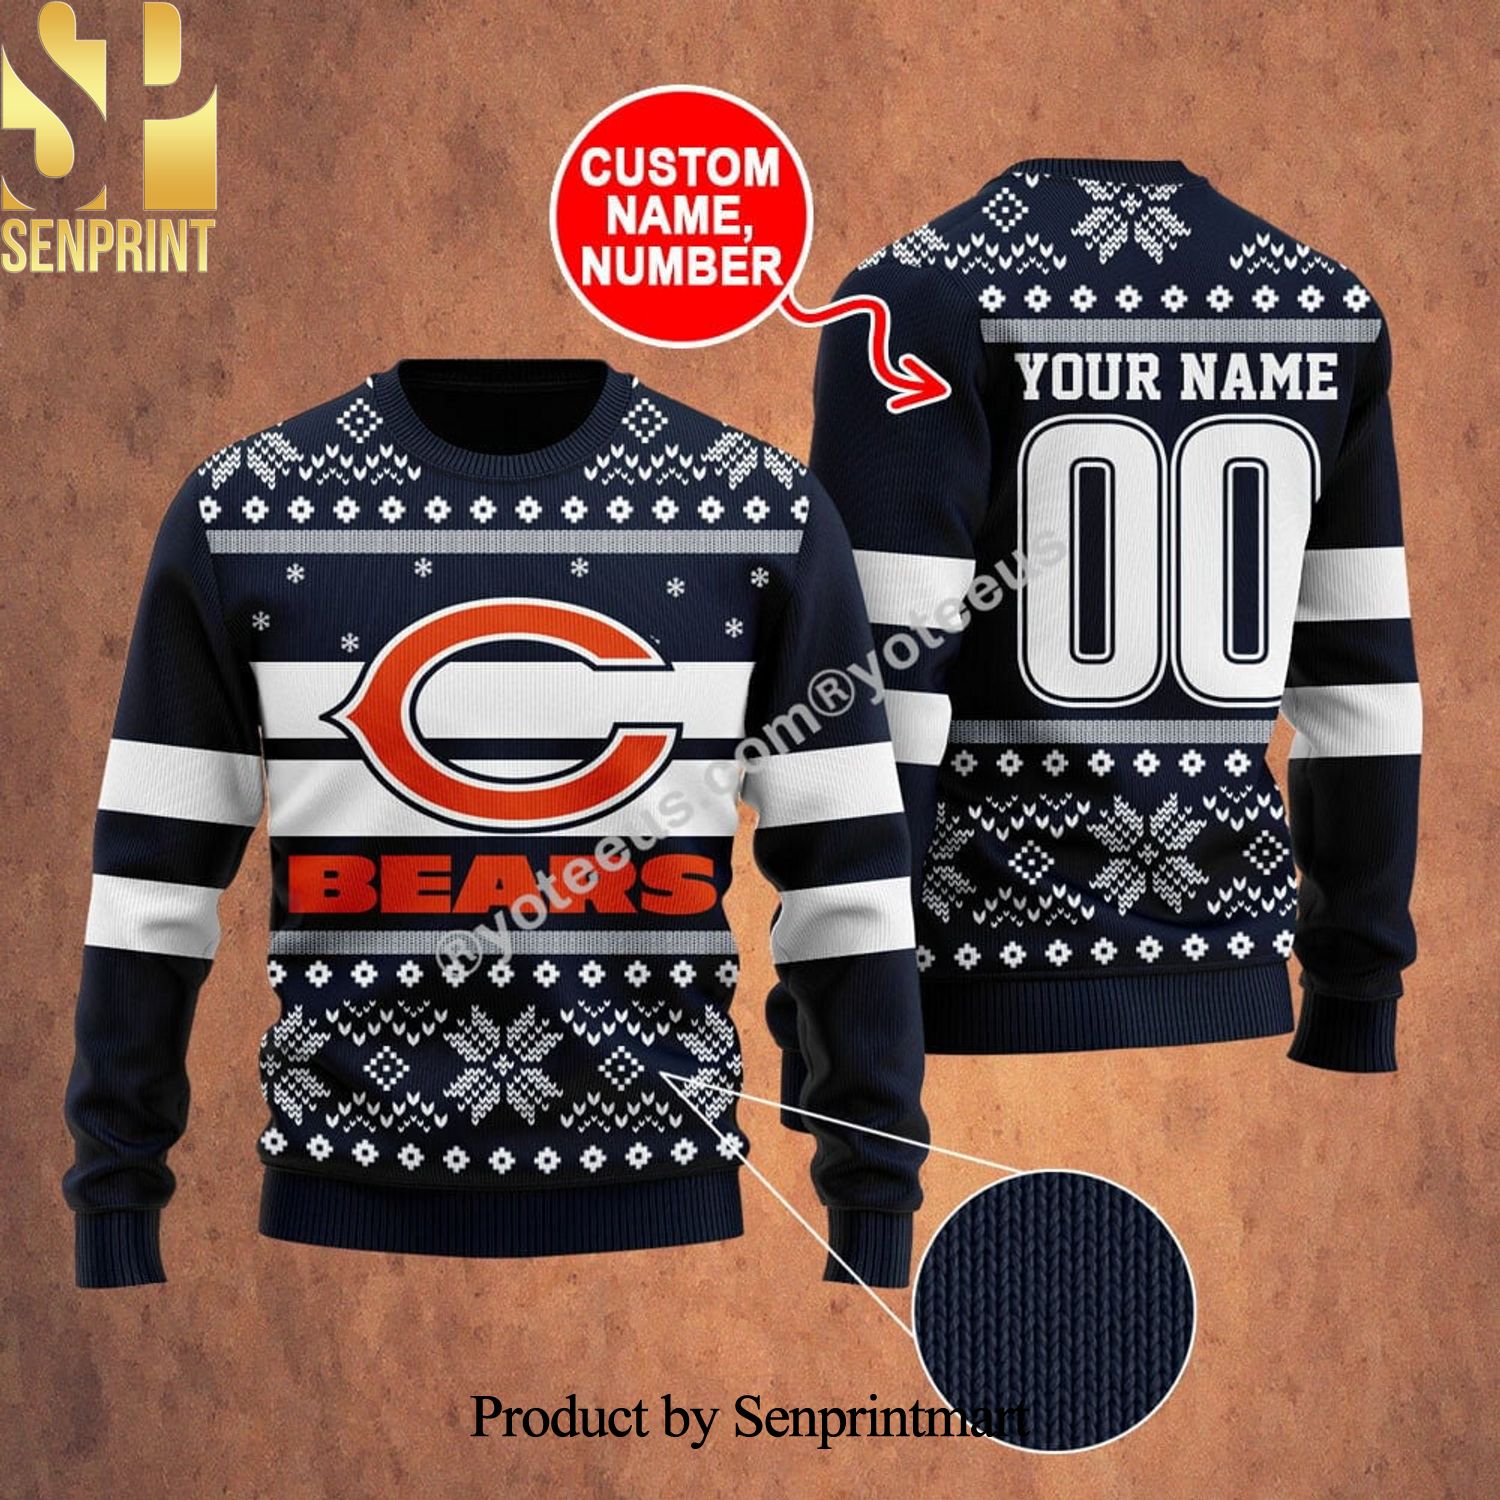 chicago bears ugly sweater with lights